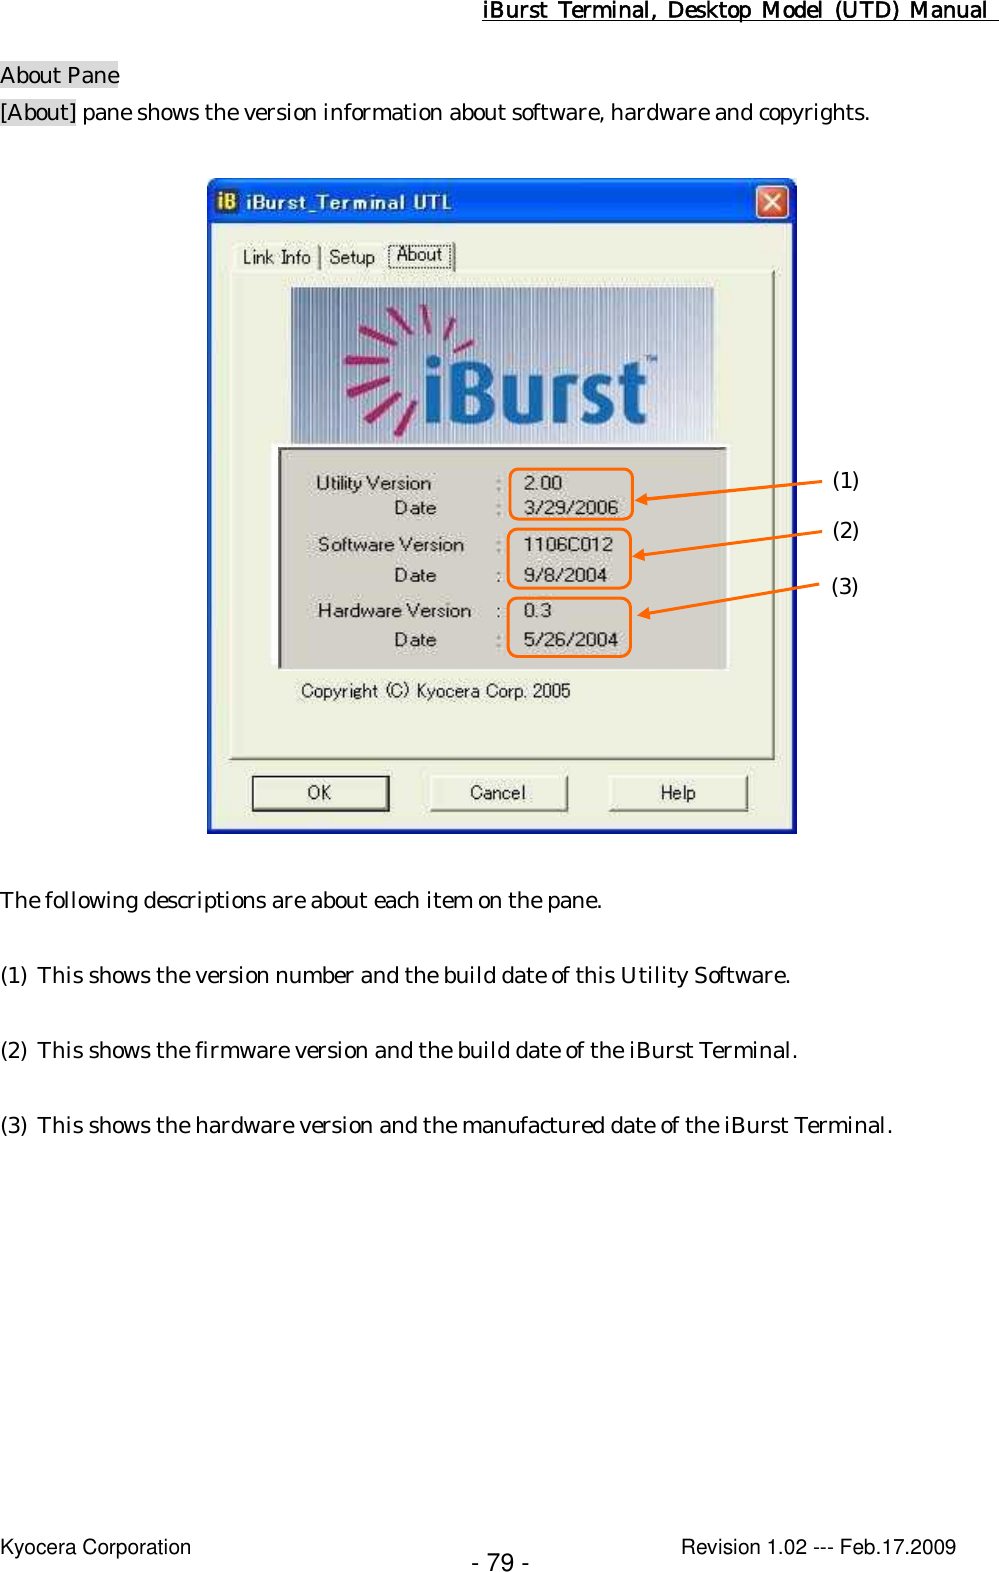 iBurst  Terminal, Desktop  Model  (UTD)  Manual    Kyocera Corporation                                                                                              Revision 1.02 --- Feb.17.2009 - 79 - About Pane [About] pane shows the version information about software, hardware and copyrights.    The following descriptions are about each item on the pane.  (1) This shows the version number and the build date of this Utility Software.  (2) This shows the firmware version and the build date of the iBurst Terminal.  (3) This shows the hardware version and the manufactured date of the iBurst Terminal.  (1) (2) (3) 